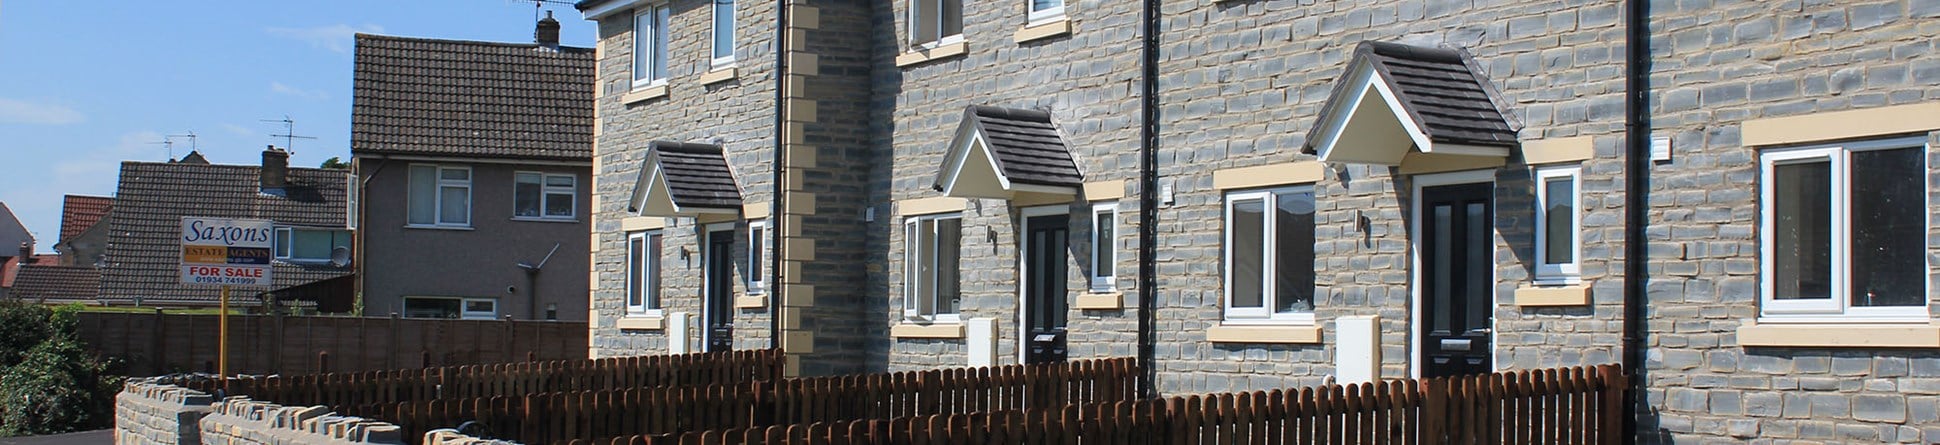 Image of newly built terraced housing in Cheddar, Somerset